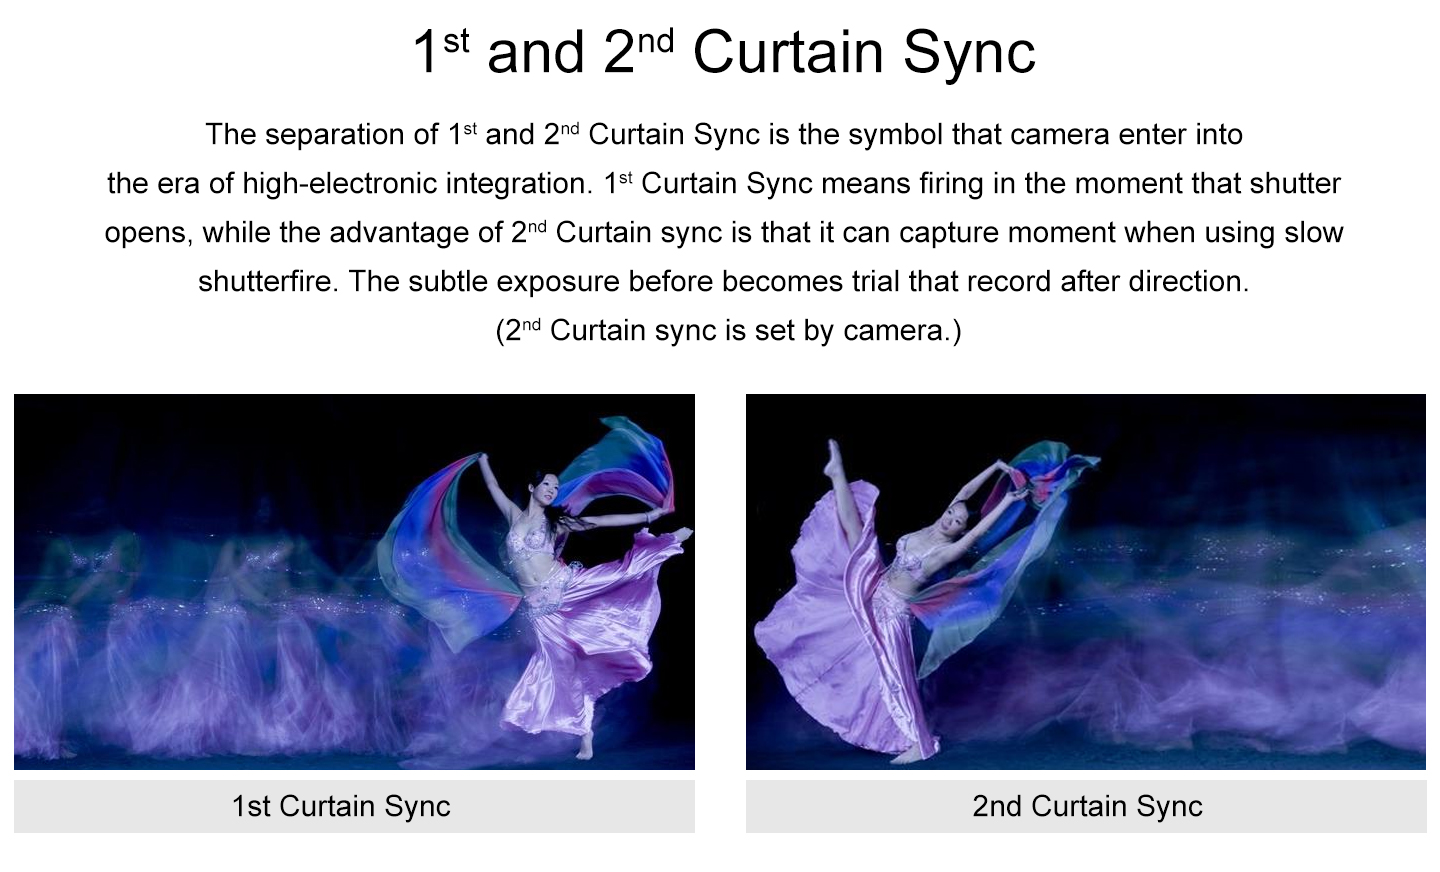 1st and 2nd Curtain Sync